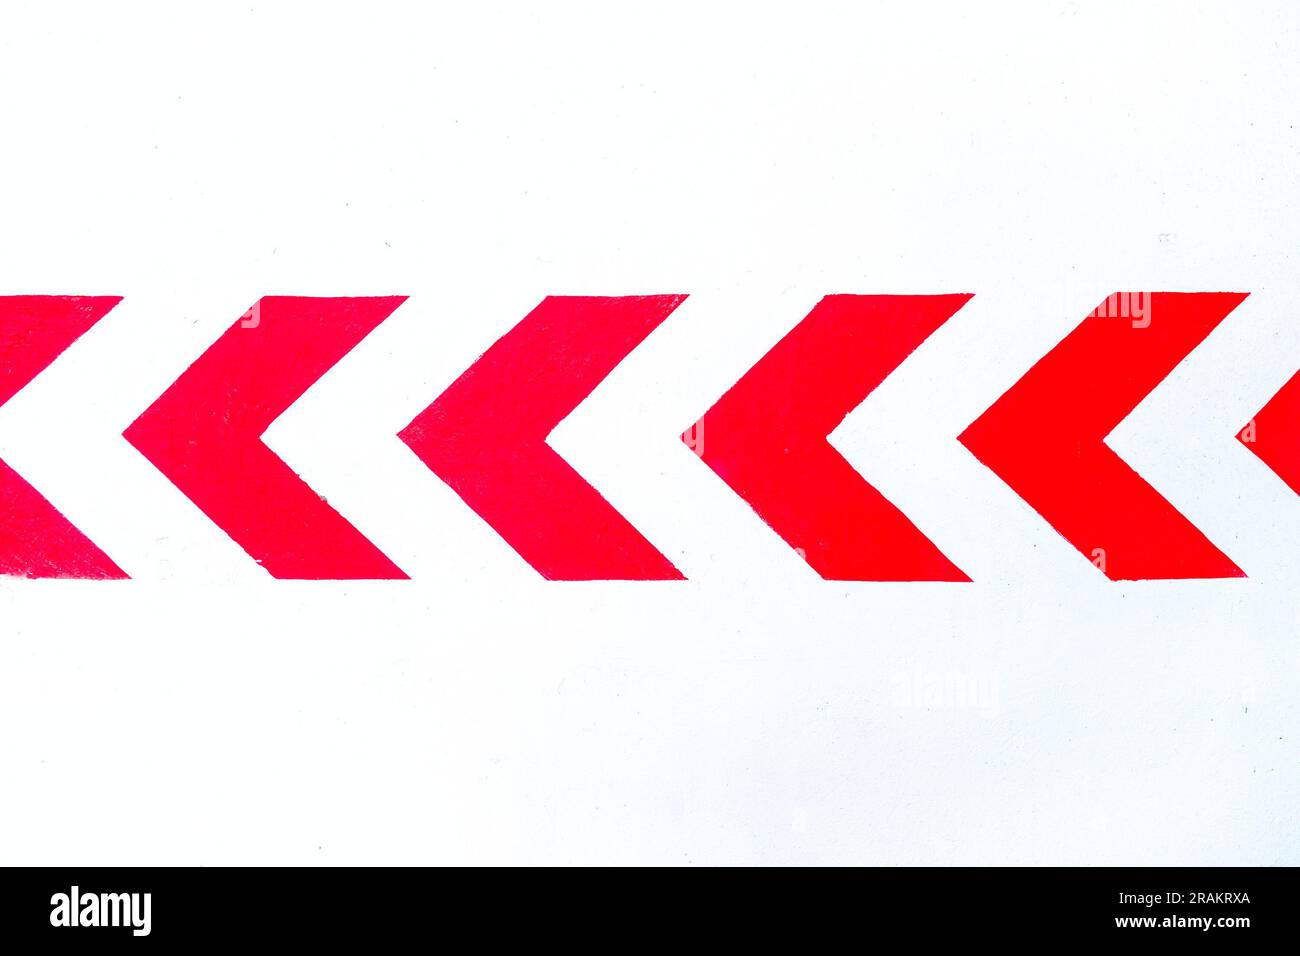 red arrow symbols icons road signage marking and giving directions Stock Photo